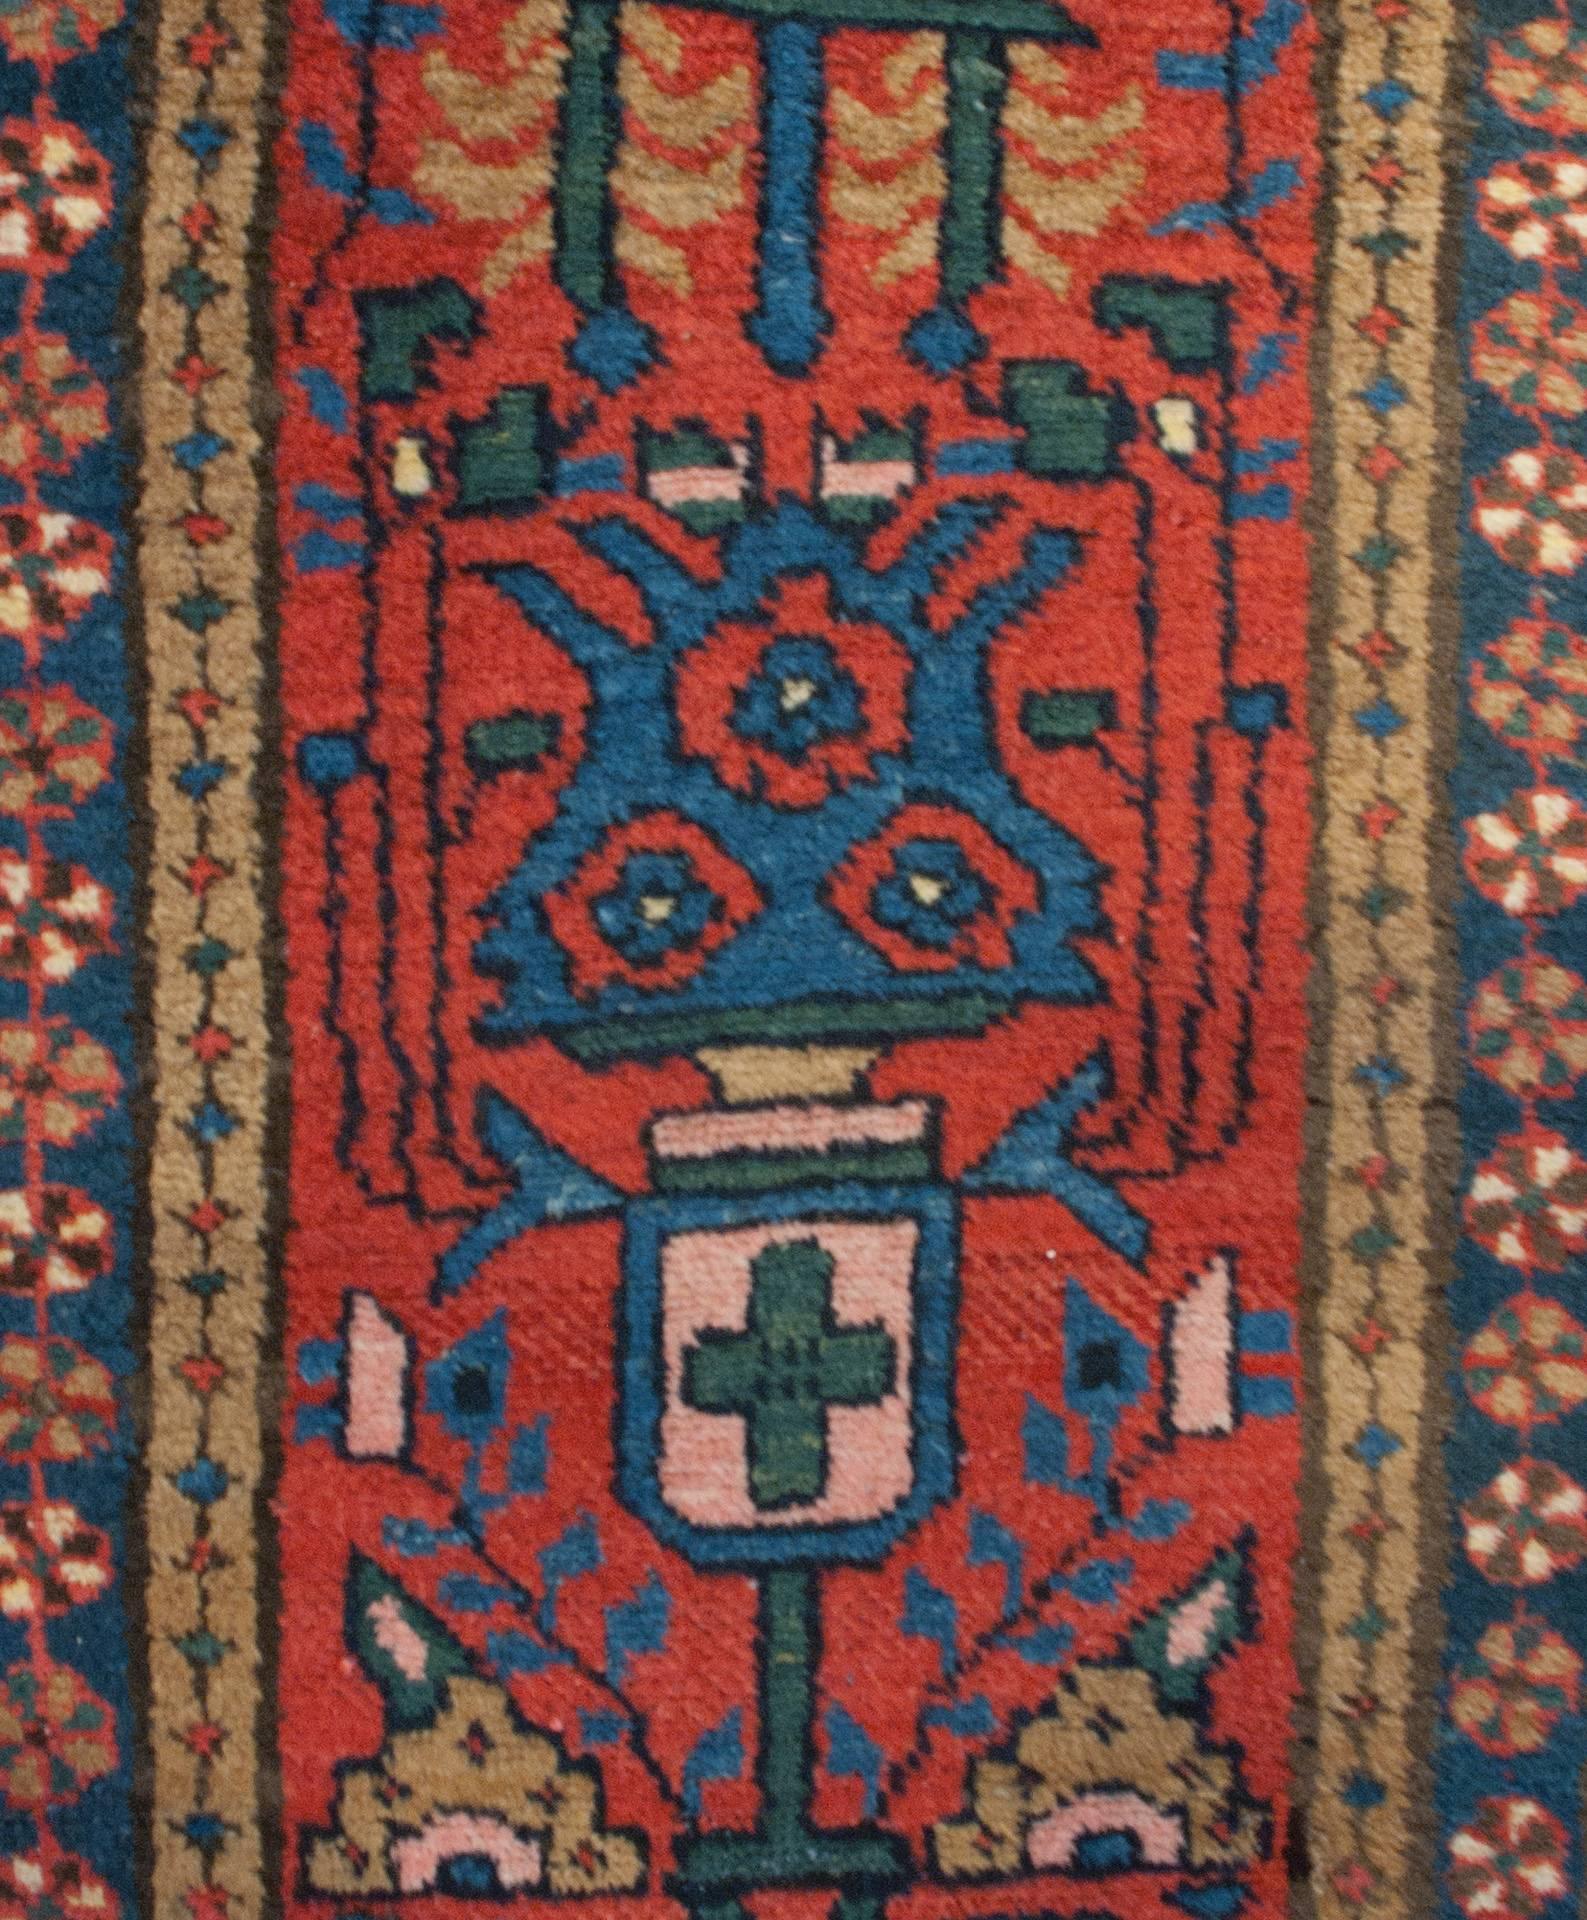 An early 20th century Persian Heriz runner with a bold indigo, emerald and taupe floral pattern on a crimson background, surrounded by a matching diamond motif border on either side of a round multicolored floral border on an indigo background.